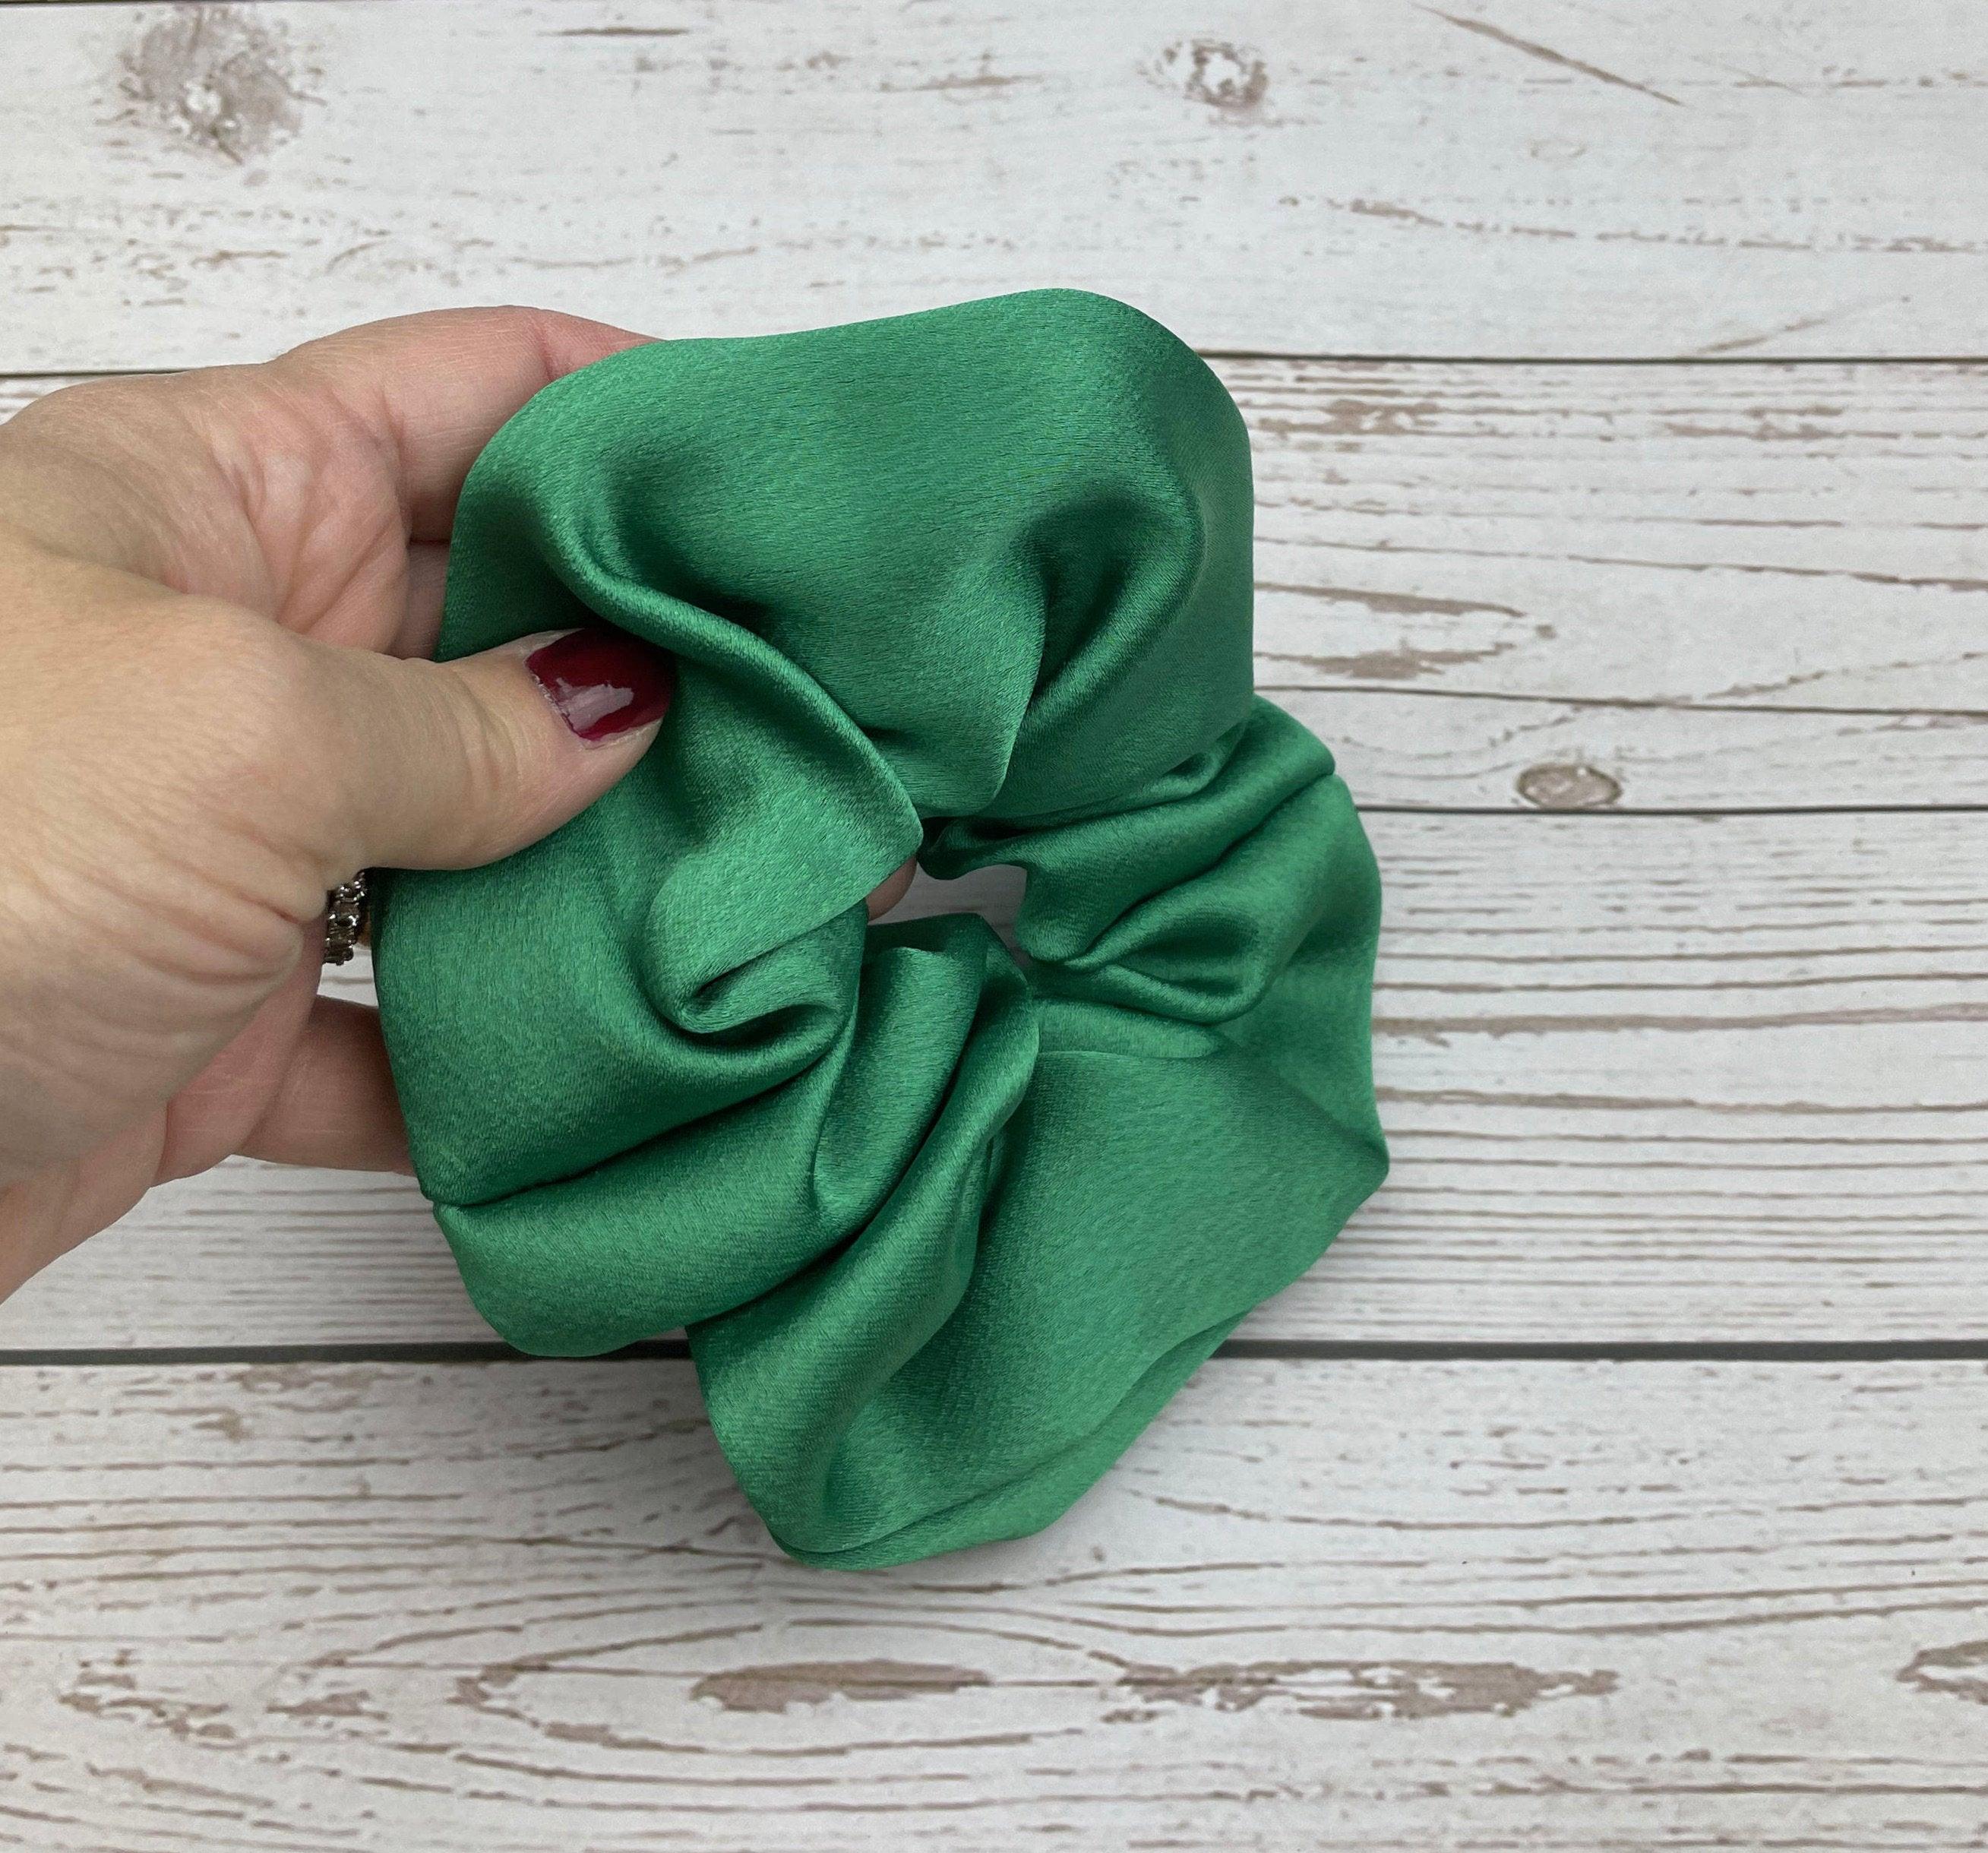 Beautiful Handmade Satin Scrunchie with Bow - Colorful Pattern Hair Accessory in Green, Lilac, Red, Beige and Orange - Hair Ties and Scrunchies available at Moyoni Design